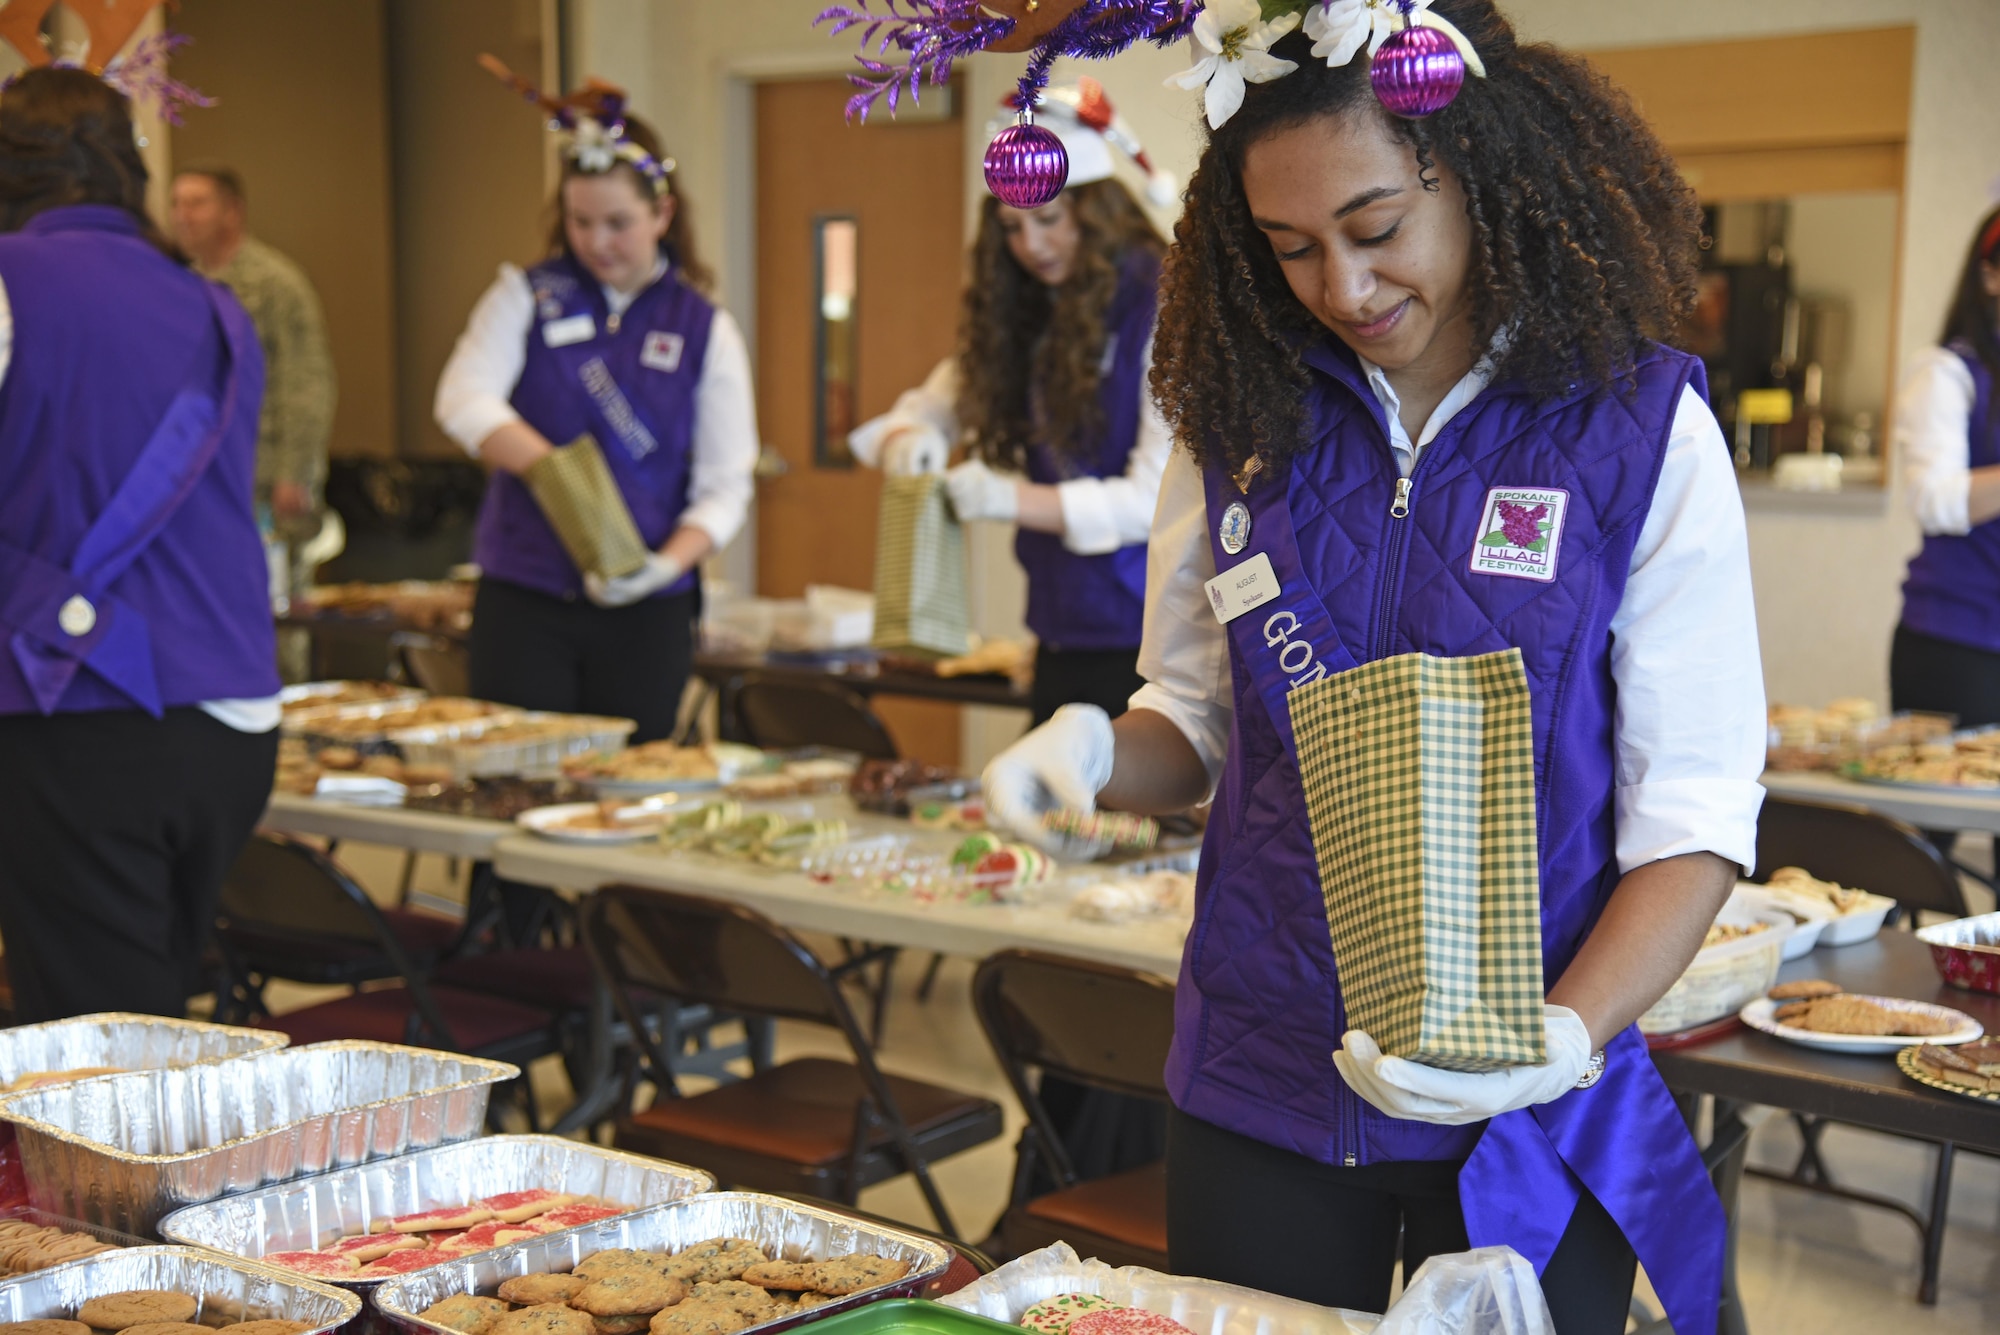 August Corppetts, Spokane Lilac Festival Princess and Gonzaga Preparatory School student, fills a bag with homemade cookies during the annual Operation Cookie Drop Dec. 6, 2016, at Fairchild Air Force Base. The Spokane Lilac Festival Princesses partnered with Officer’s Spouses Club to pack nearly 500 bags with cookies for Fairchild Airmen living in the dormitories. (U.S. Air Force photo/Senior Airman Mackenzie Richardson)
